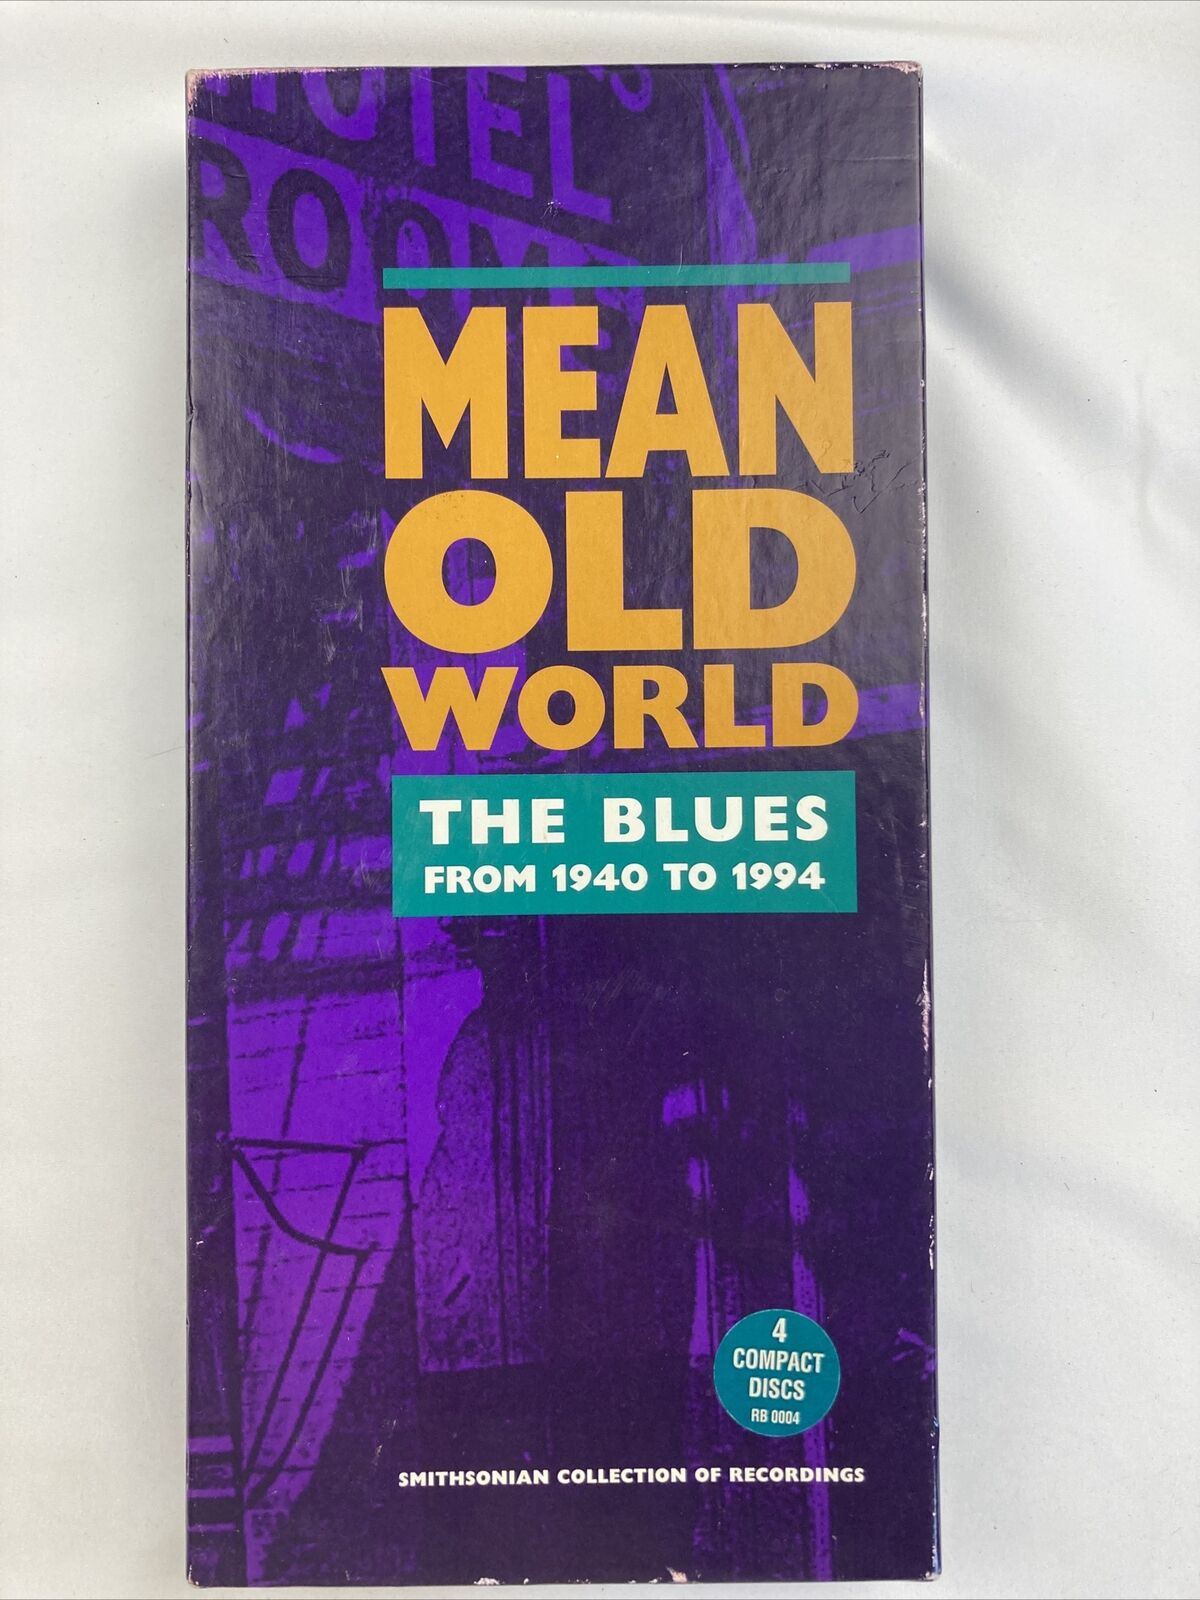 Mean Old World: The Blues from 1940 to 1994 by Various Artists (CD, Jul-1996)